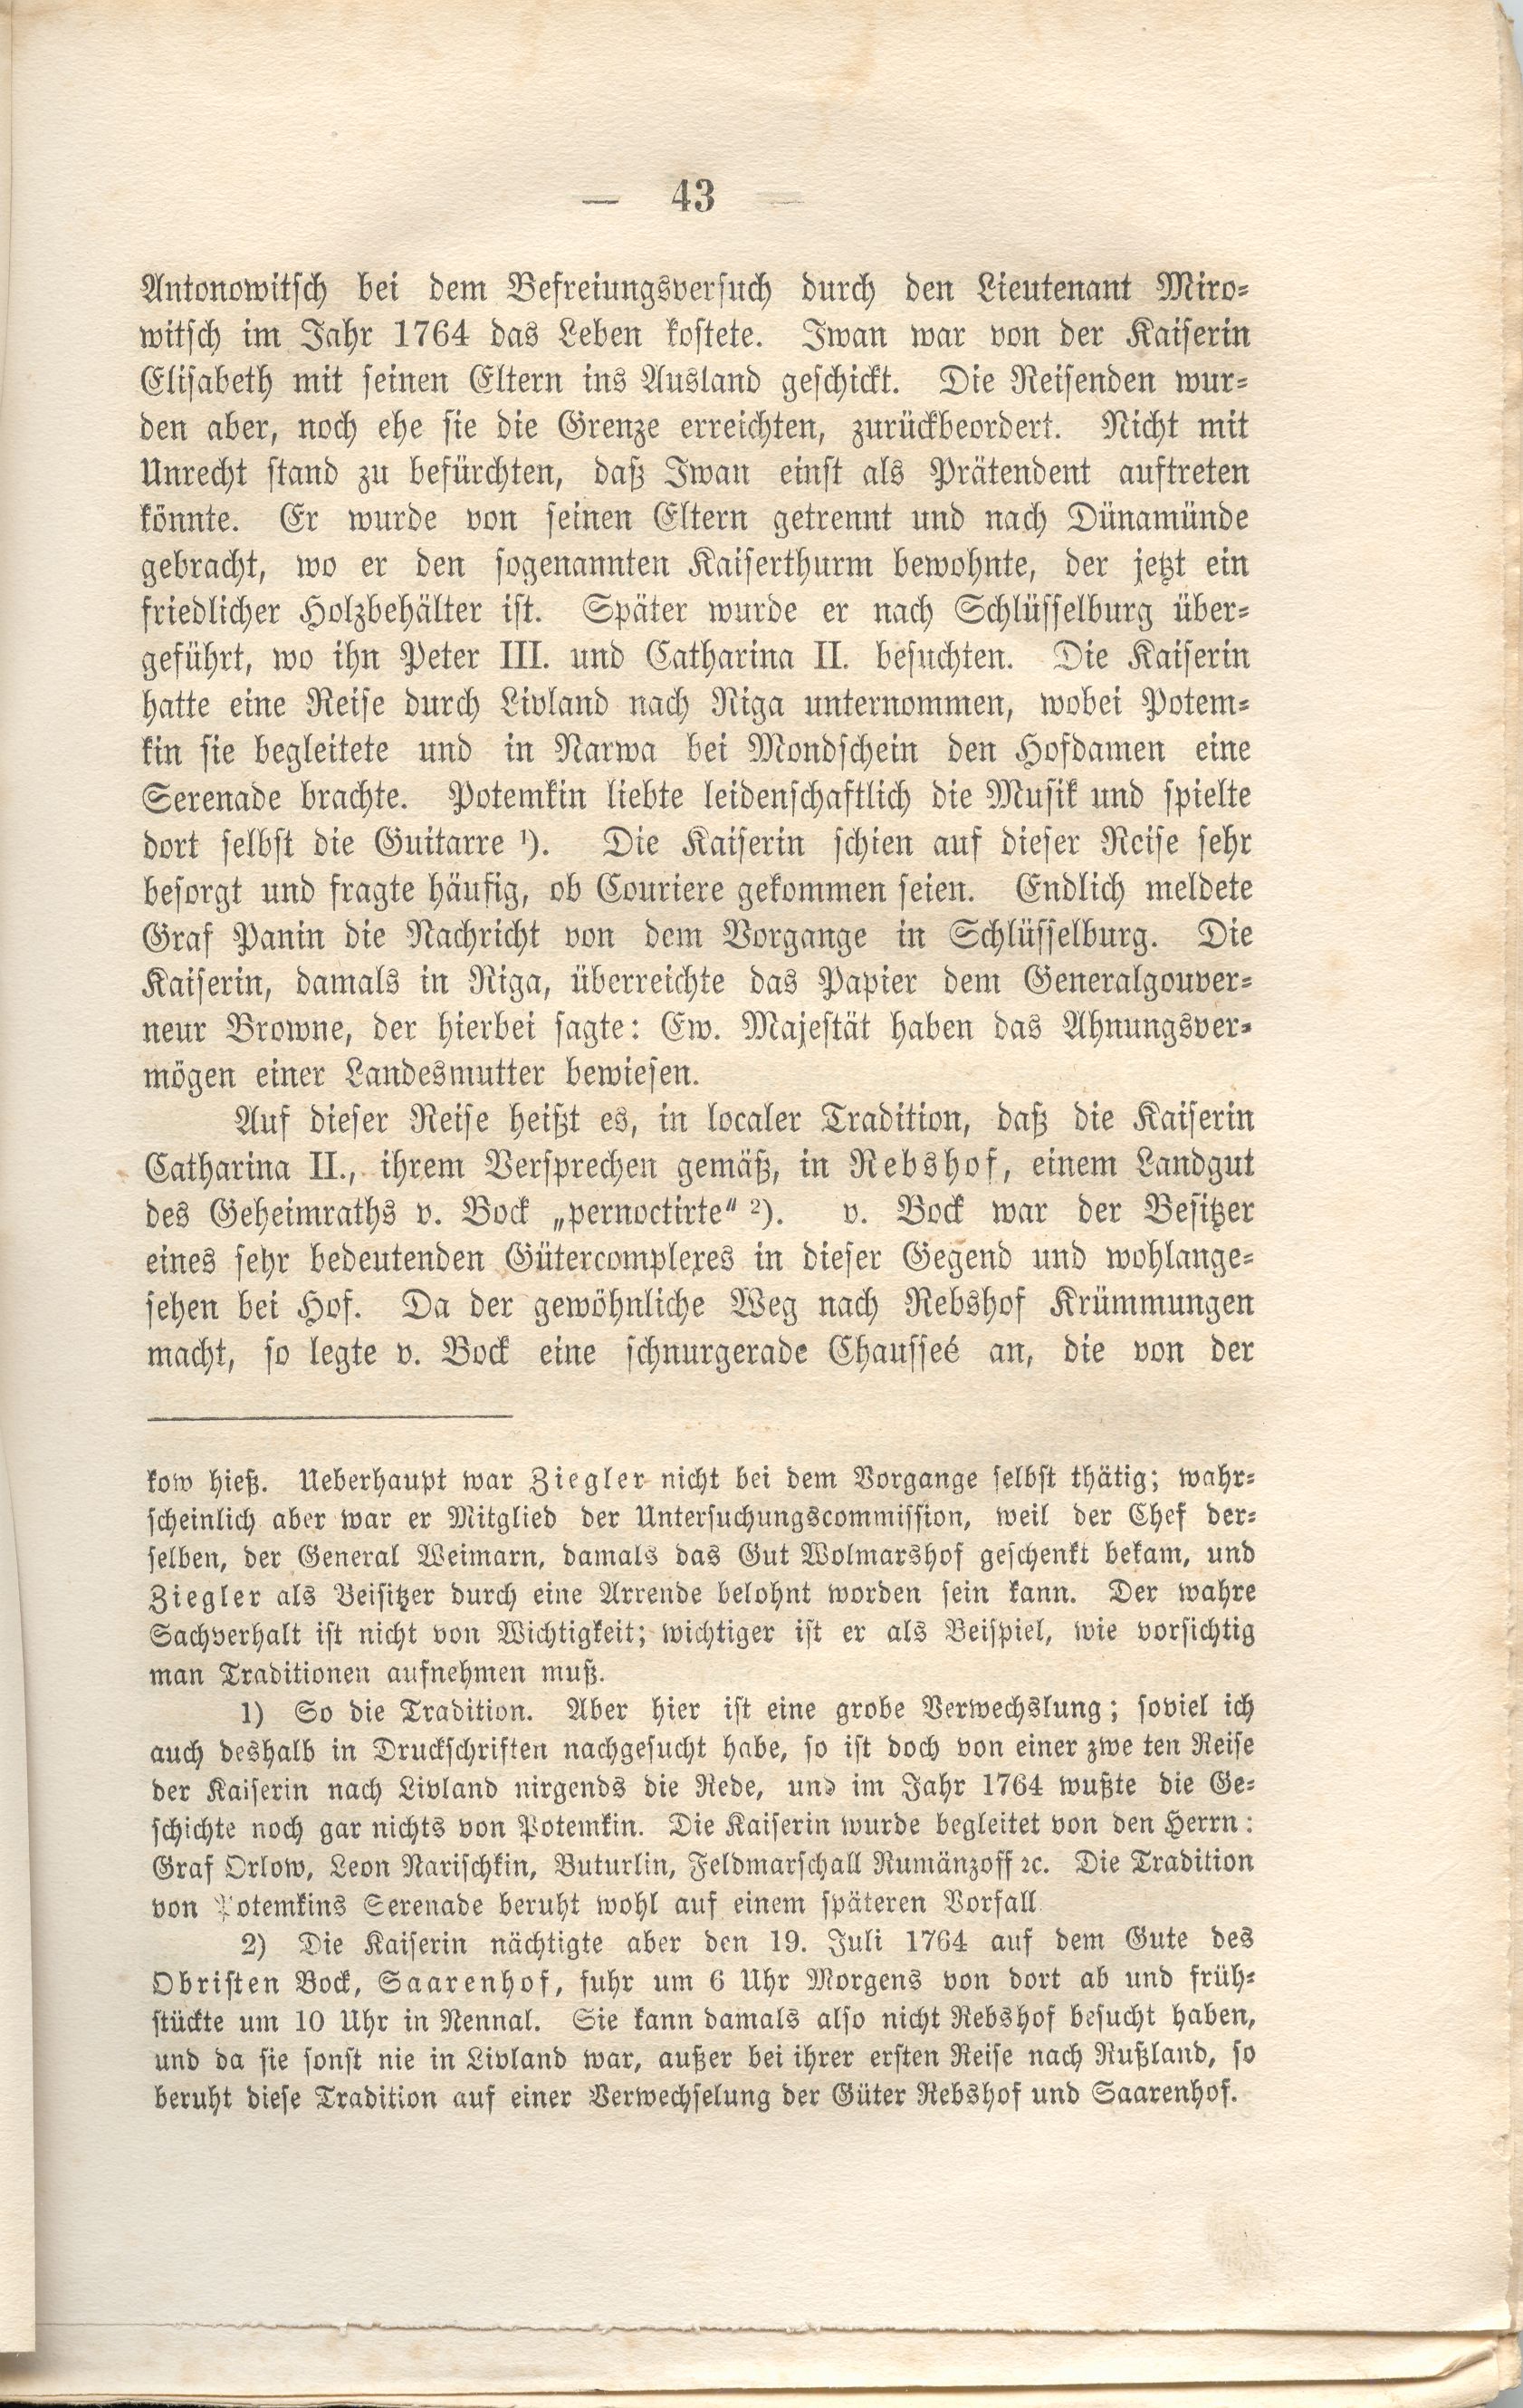 Wagien (1868) | 47. (43) Main body of text